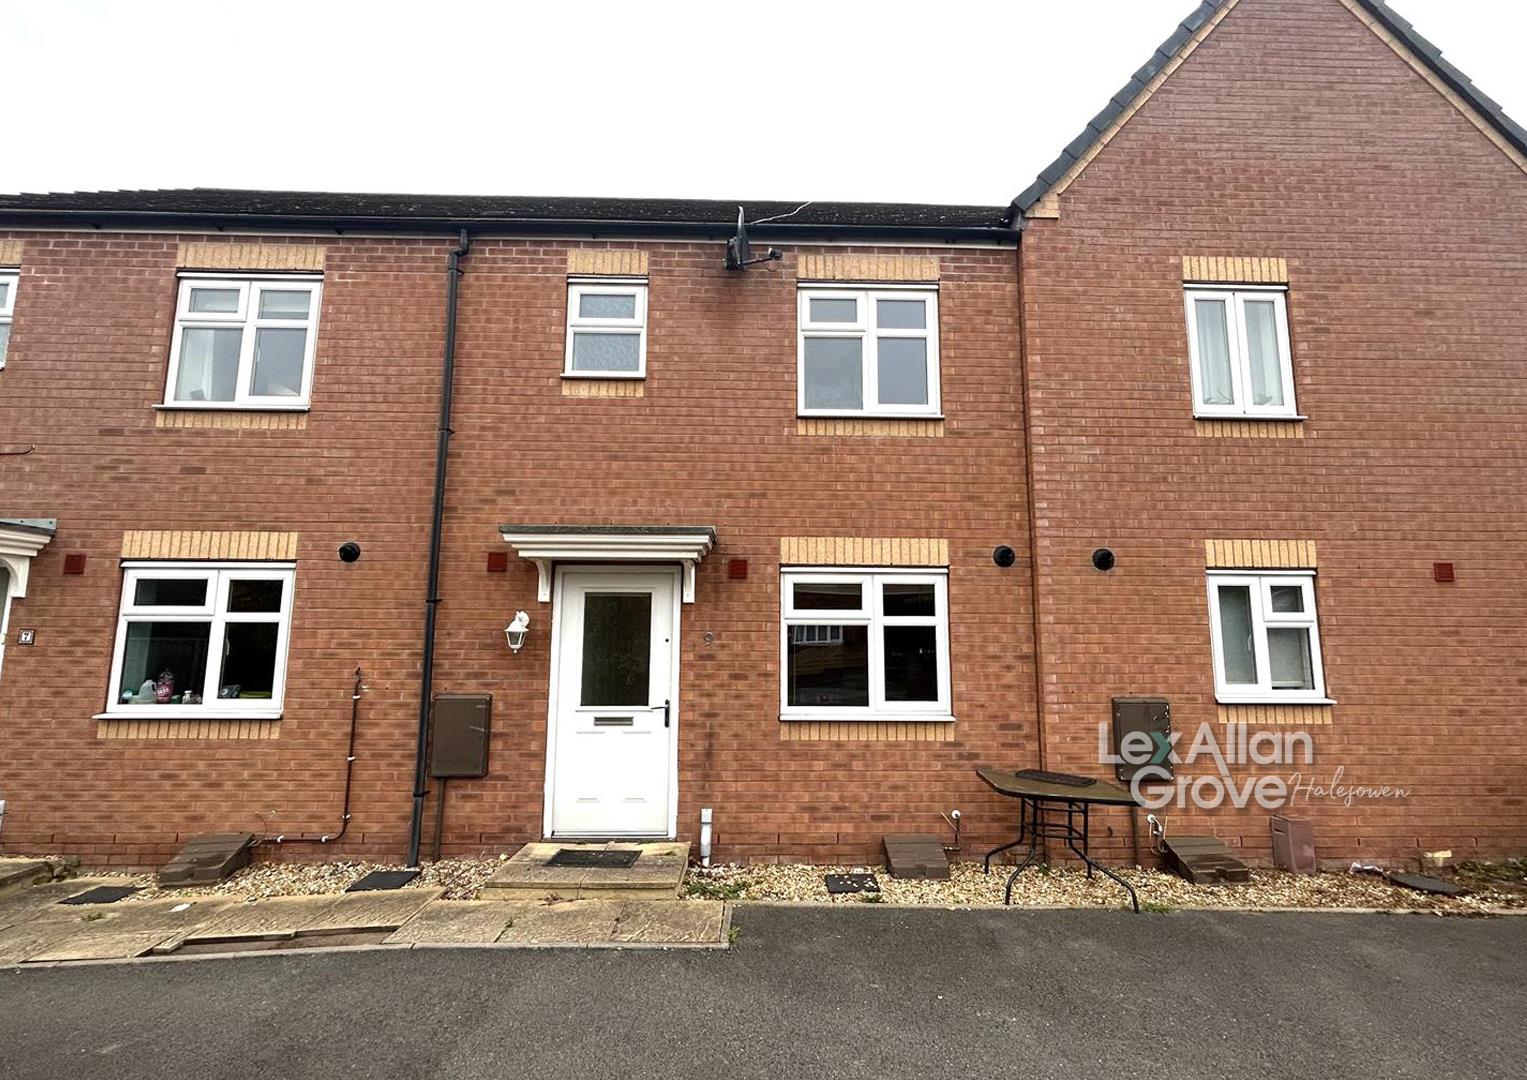 3 bed house for sale in Banners Lane, Halesowen - Property Image 1